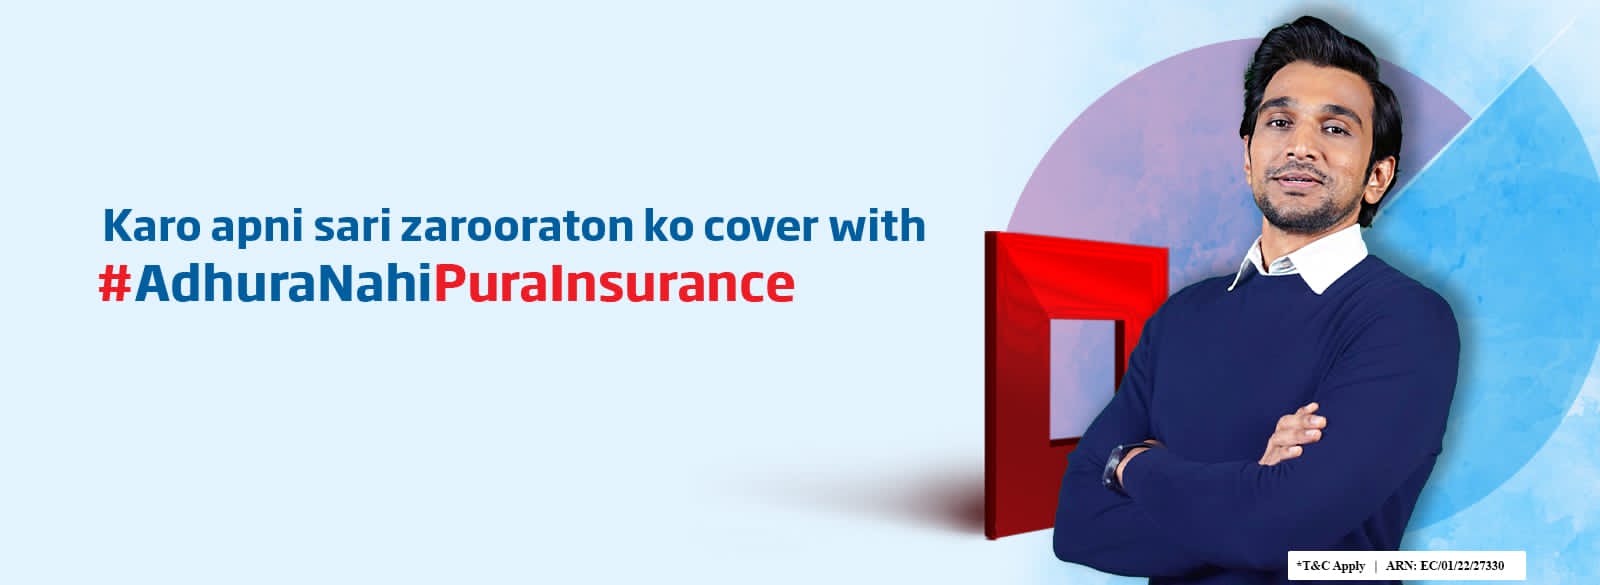 Hdfc Lifes Latest Digital Campaign Emphasises The Need For Adequate Life Insurance Cover 9937